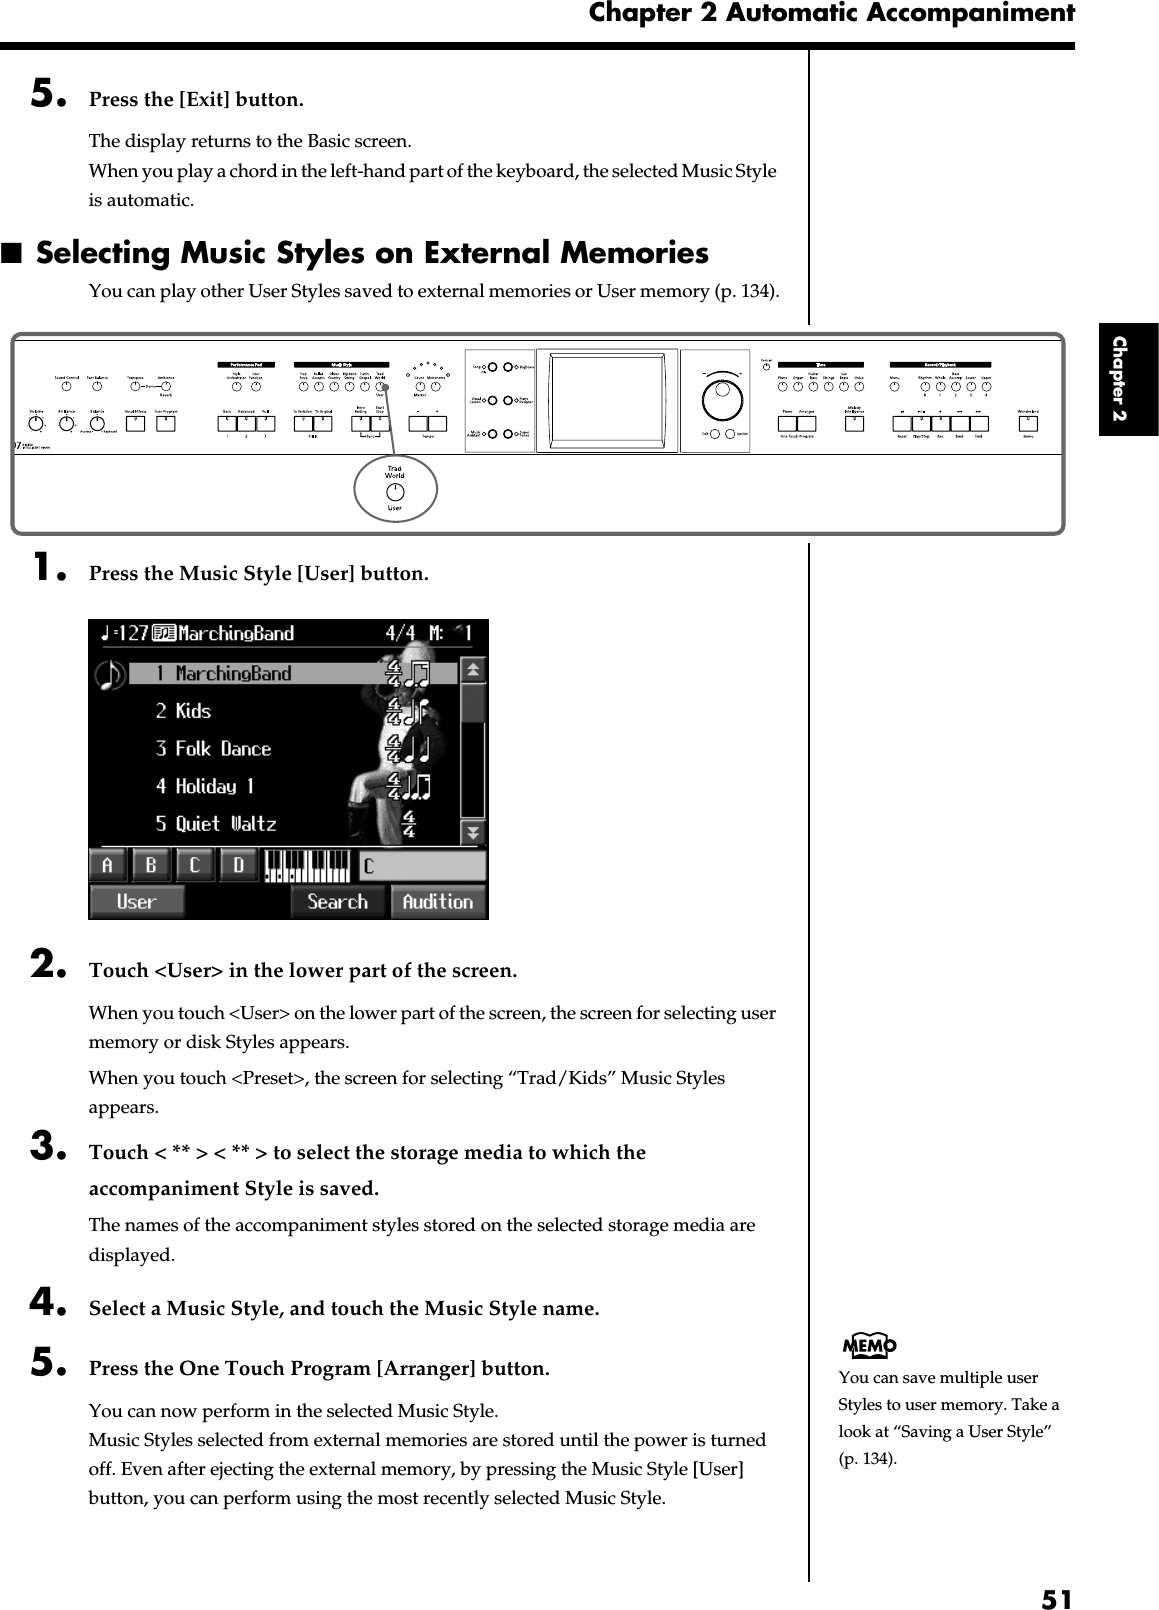 51Chapter 2 Automatic AccompanimentChapter 25. Press the [Exit] button.The display returns to the Basic screen.When you play a chord in the left-hand part of the keyboard, the selected Music Style is automatic.■Selecting Music Styles on External MemoriesYou can play other User Styles saved to external memories or User memory (p. 134).fig.panel2-31. Press the Music Style [User] button.fig.d-styldisk.eps_602. Touch &lt;User&gt; in the lower part of the screen.When you touch &lt;User&gt; on the lower part of the screen, the screen for selecting user memory or disk Styles appears.When you touch &lt;Preset&gt;, the screen for selecting “Trad/Kids” Music Styles appears.3. Touch &lt; ** &gt; &lt; ** &gt; to select the storage media to which the accompaniment Style is saved.The names of the accompaniment styles stored on the selected storage media are displayed.4. Select a Music Style, and touch the Music Style name.5. Press the One Touch Program [Arranger] button.You can now perform in the selected Music Style.Music Styles selected from external memories are stored until the power is turned off. Even after ejecting the external memory, by pressing the Music Style [User] button, you can perform using the most recently selected Music Style.You can save multiple user Styles to user memory. Take a look at “Saving a User Style” (p. 134).